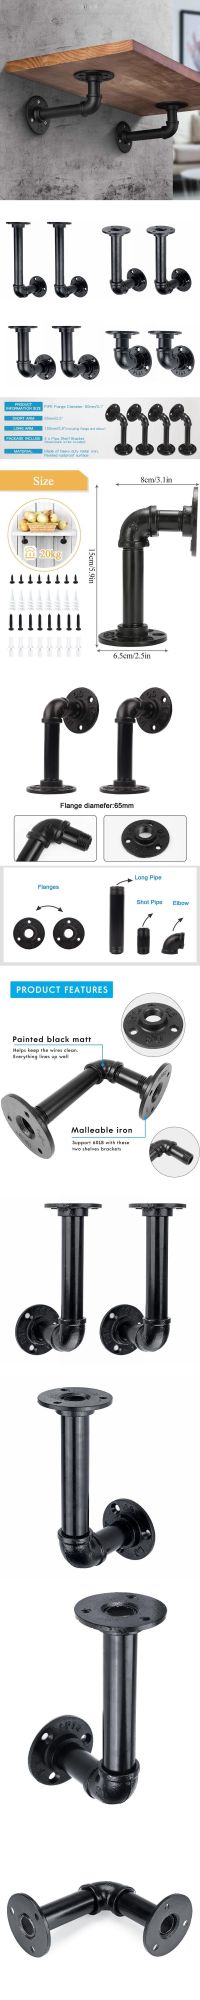 Bsp Threaded Elbow Pipes Flange Malleable Iron Home Furniture DIY Black Heavy Duty Pipe Brackets